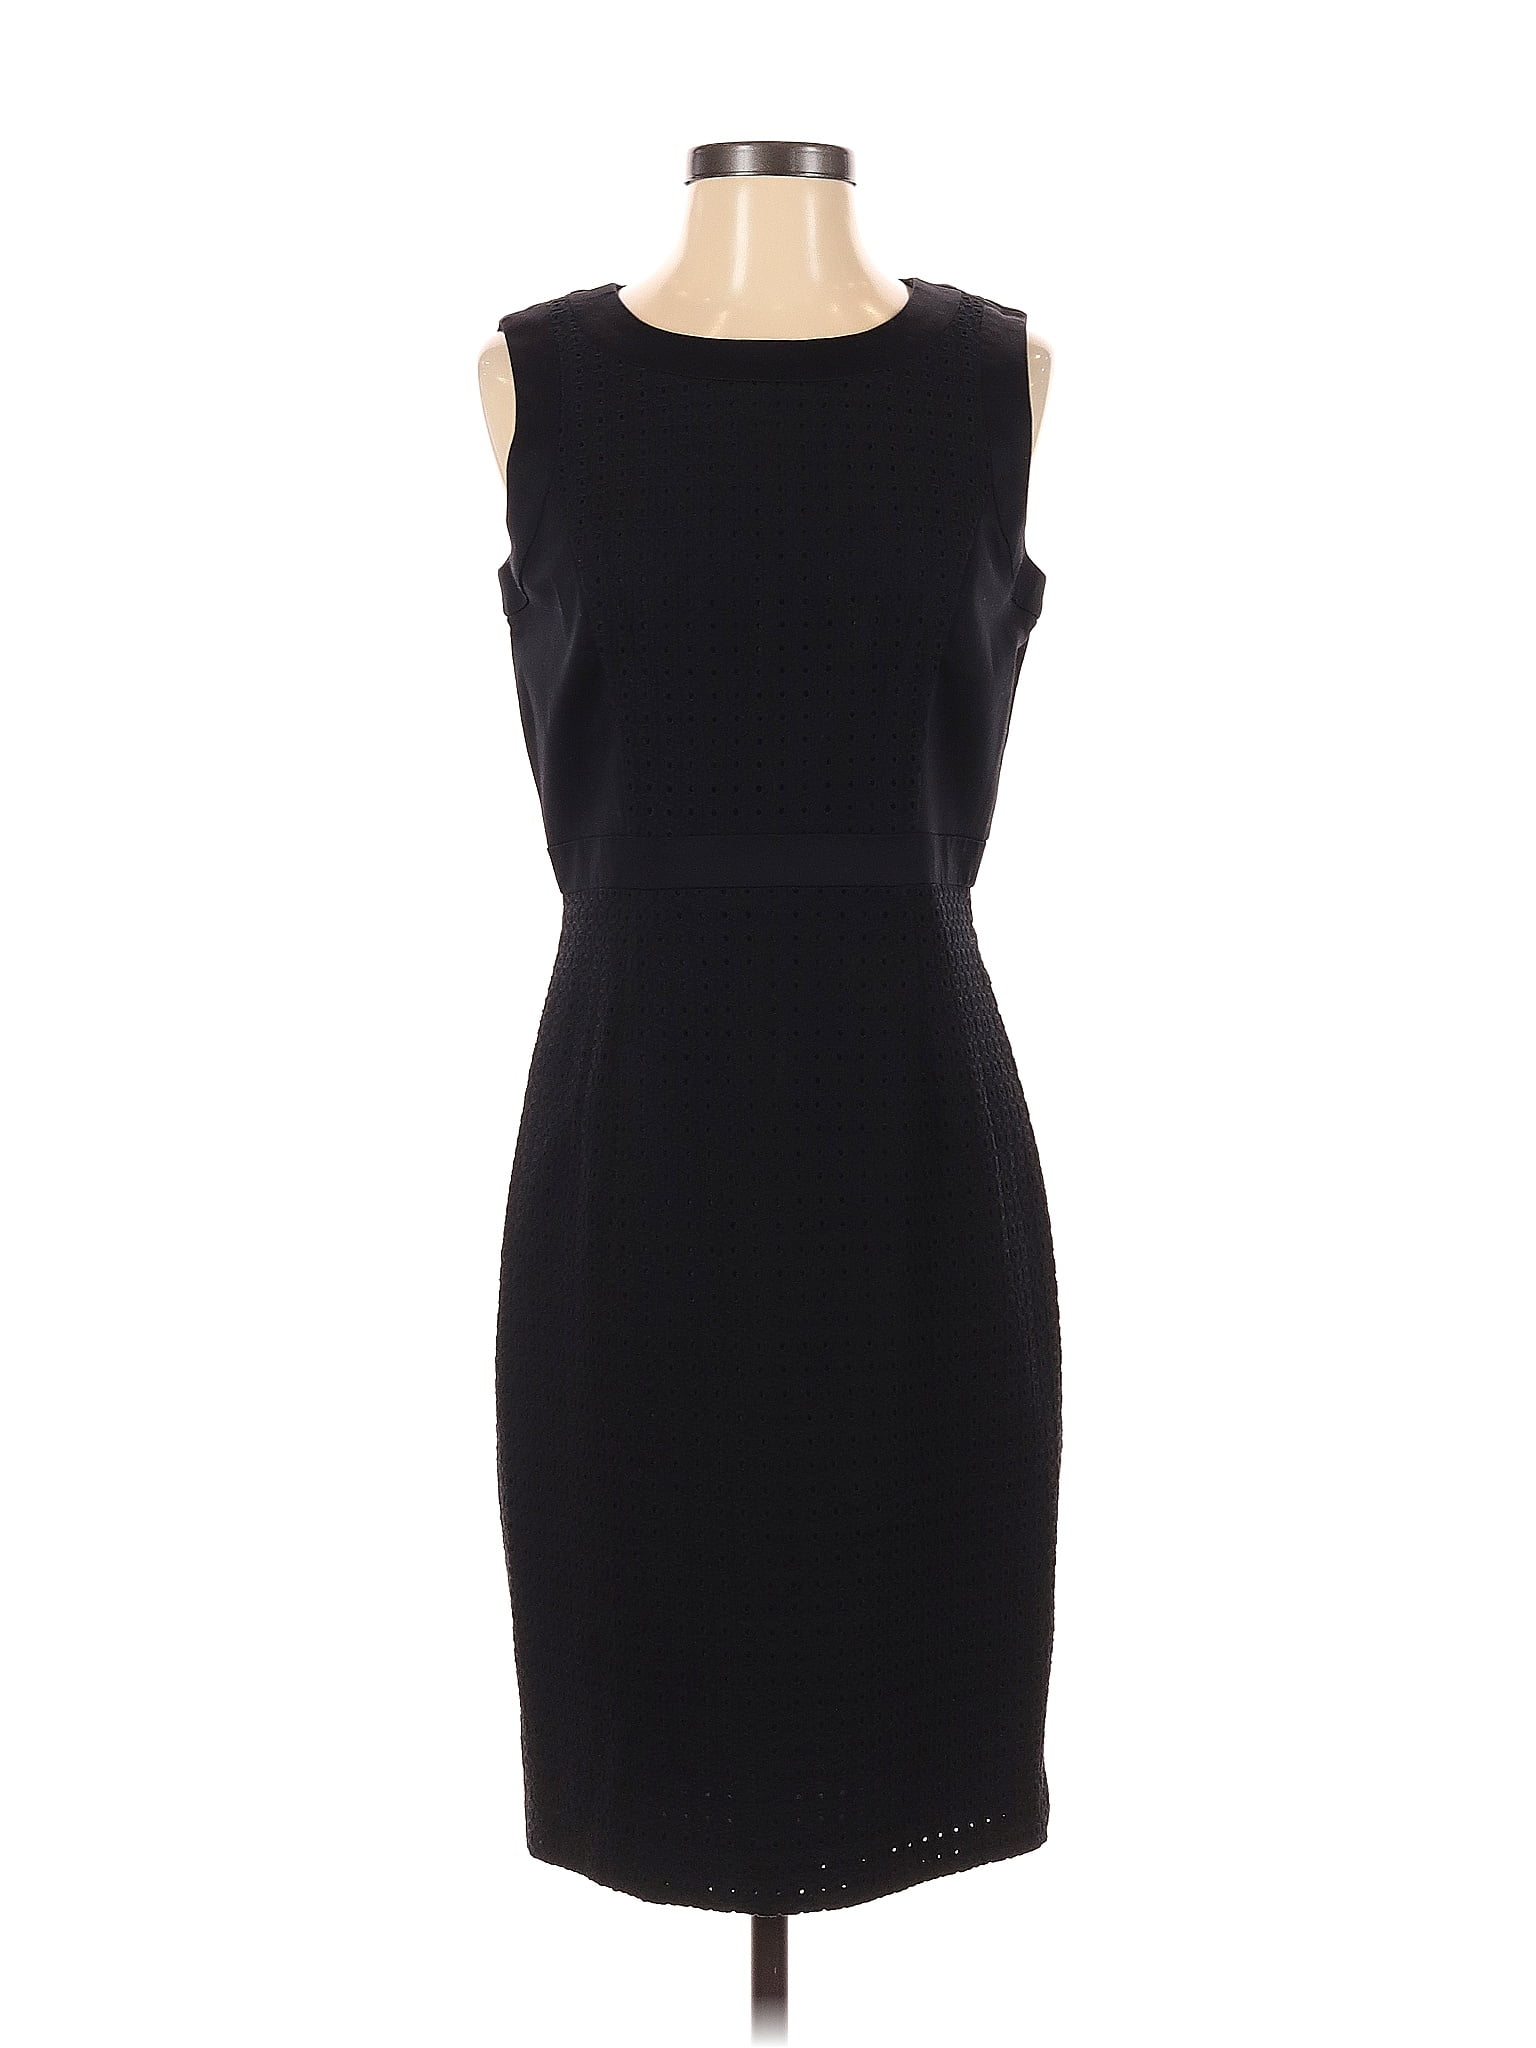 Calvin Klein 100% Cotton Solid Black Casual Dress Size 4 - 75% off ...